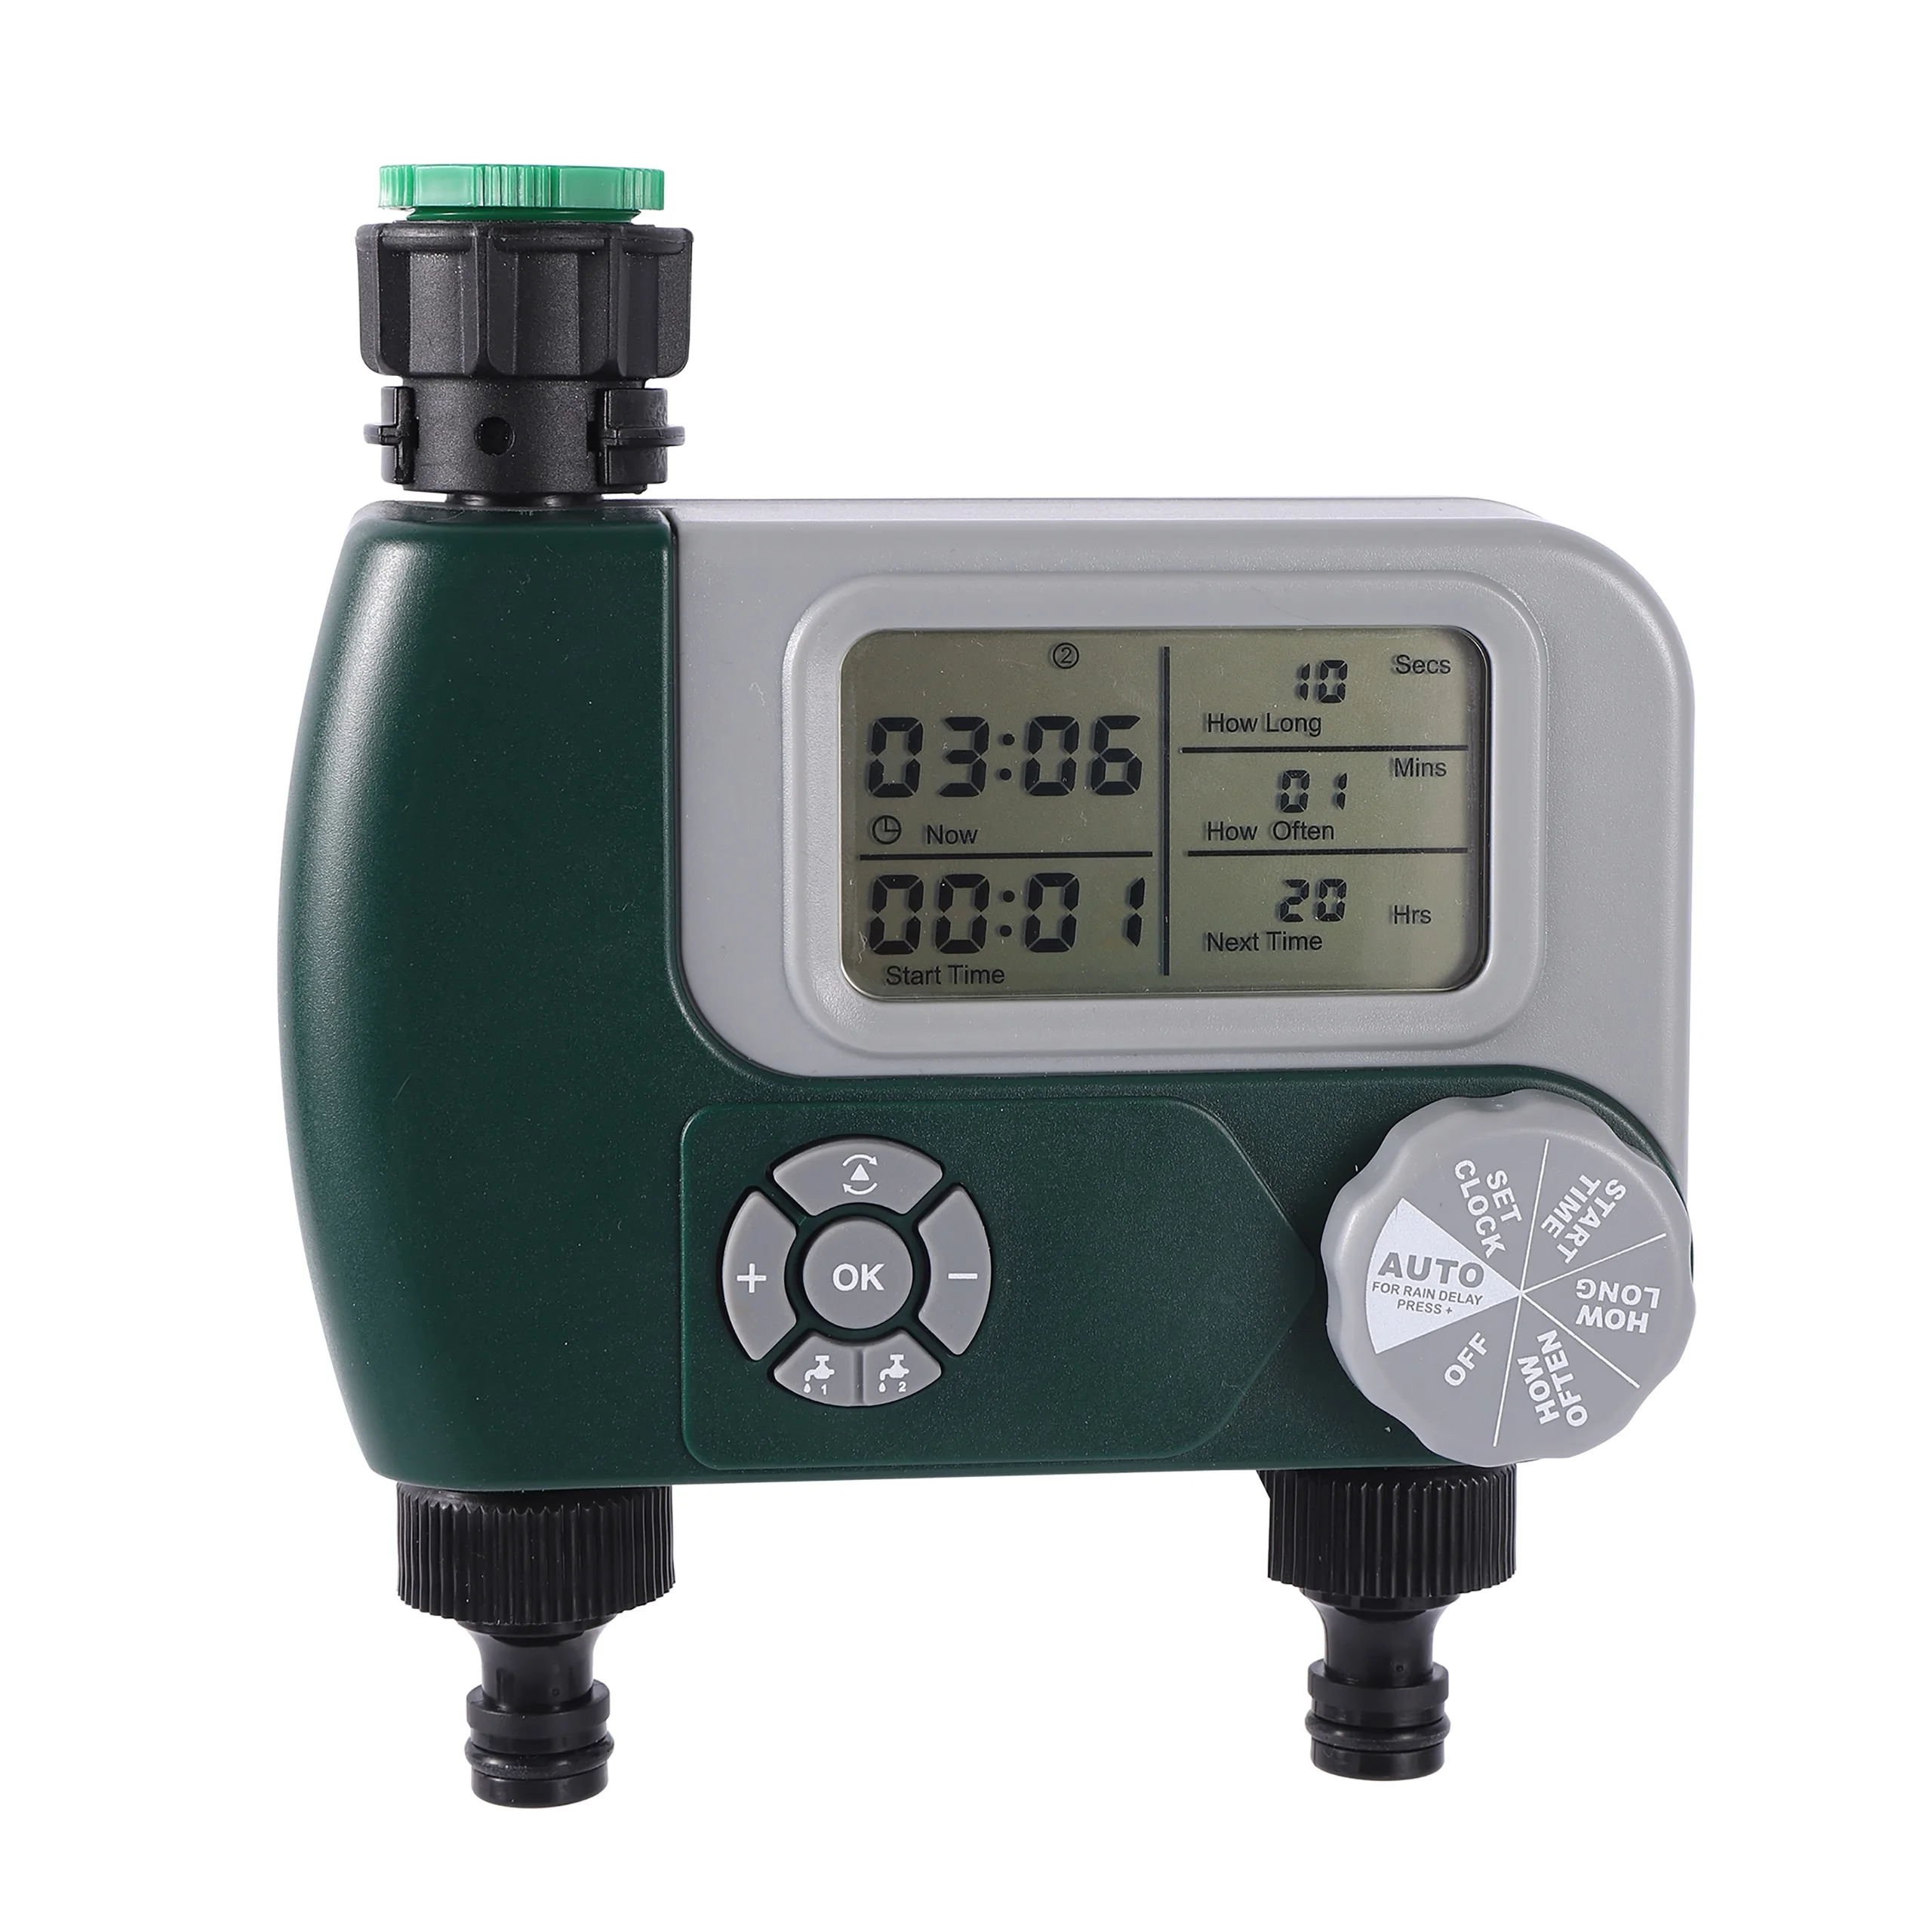 2 Outlet Digital Programmable Water Timer Garden Lawn Automatic Watering Sprinkler System Irrigation Controller Battery Operated